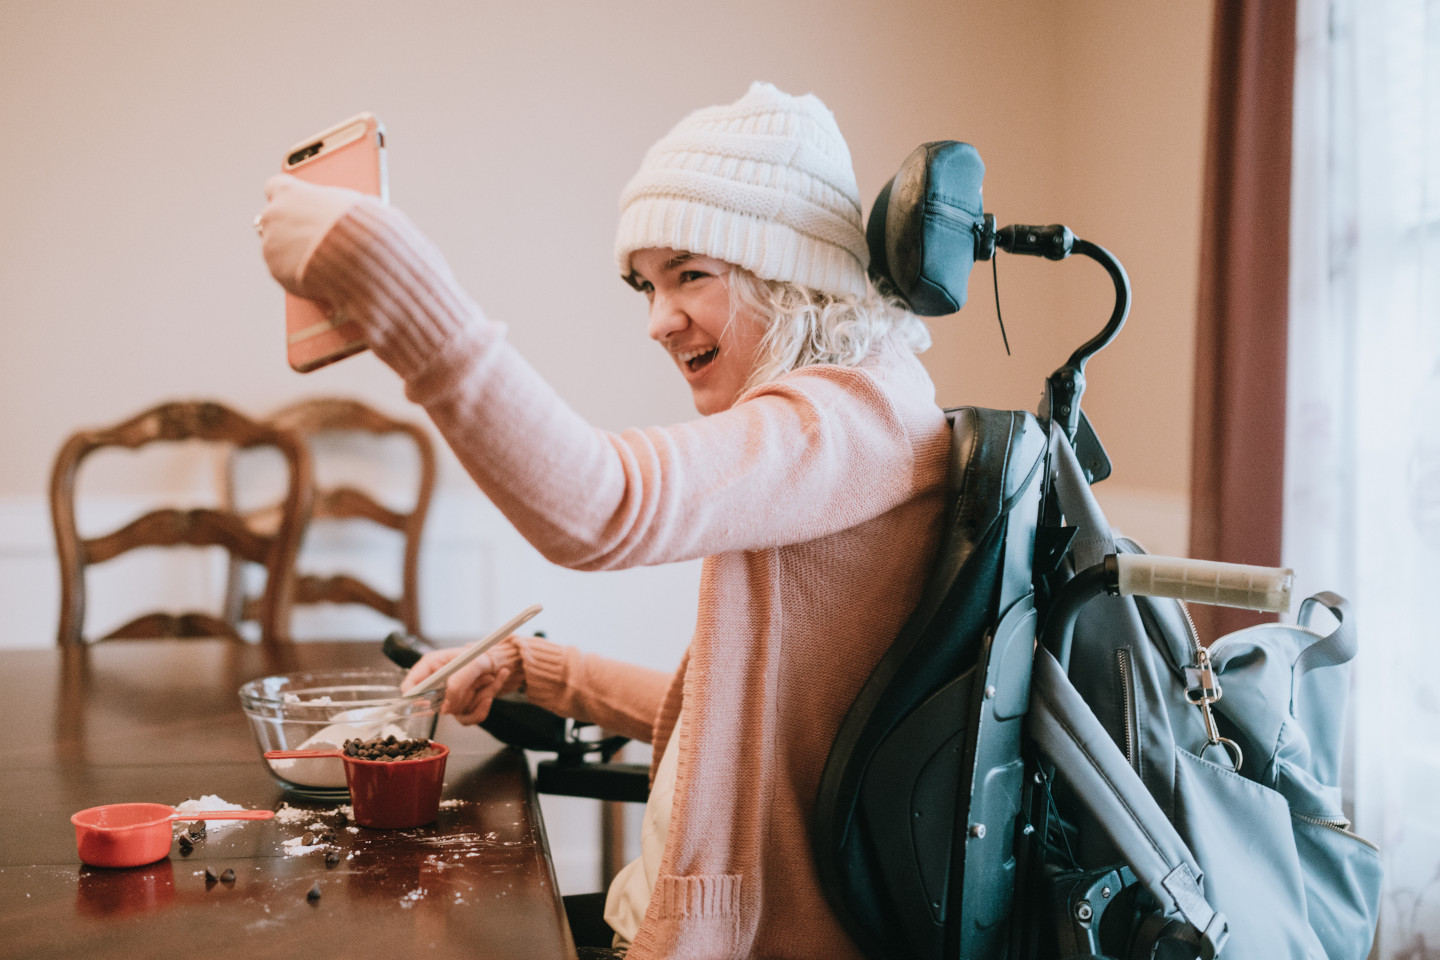 An independent young adult woman with cerebral palsy going about some of her daily routines at home. She smiles for a self portrait with her smartphone while mixing together ingredients for making chocolate cookies.